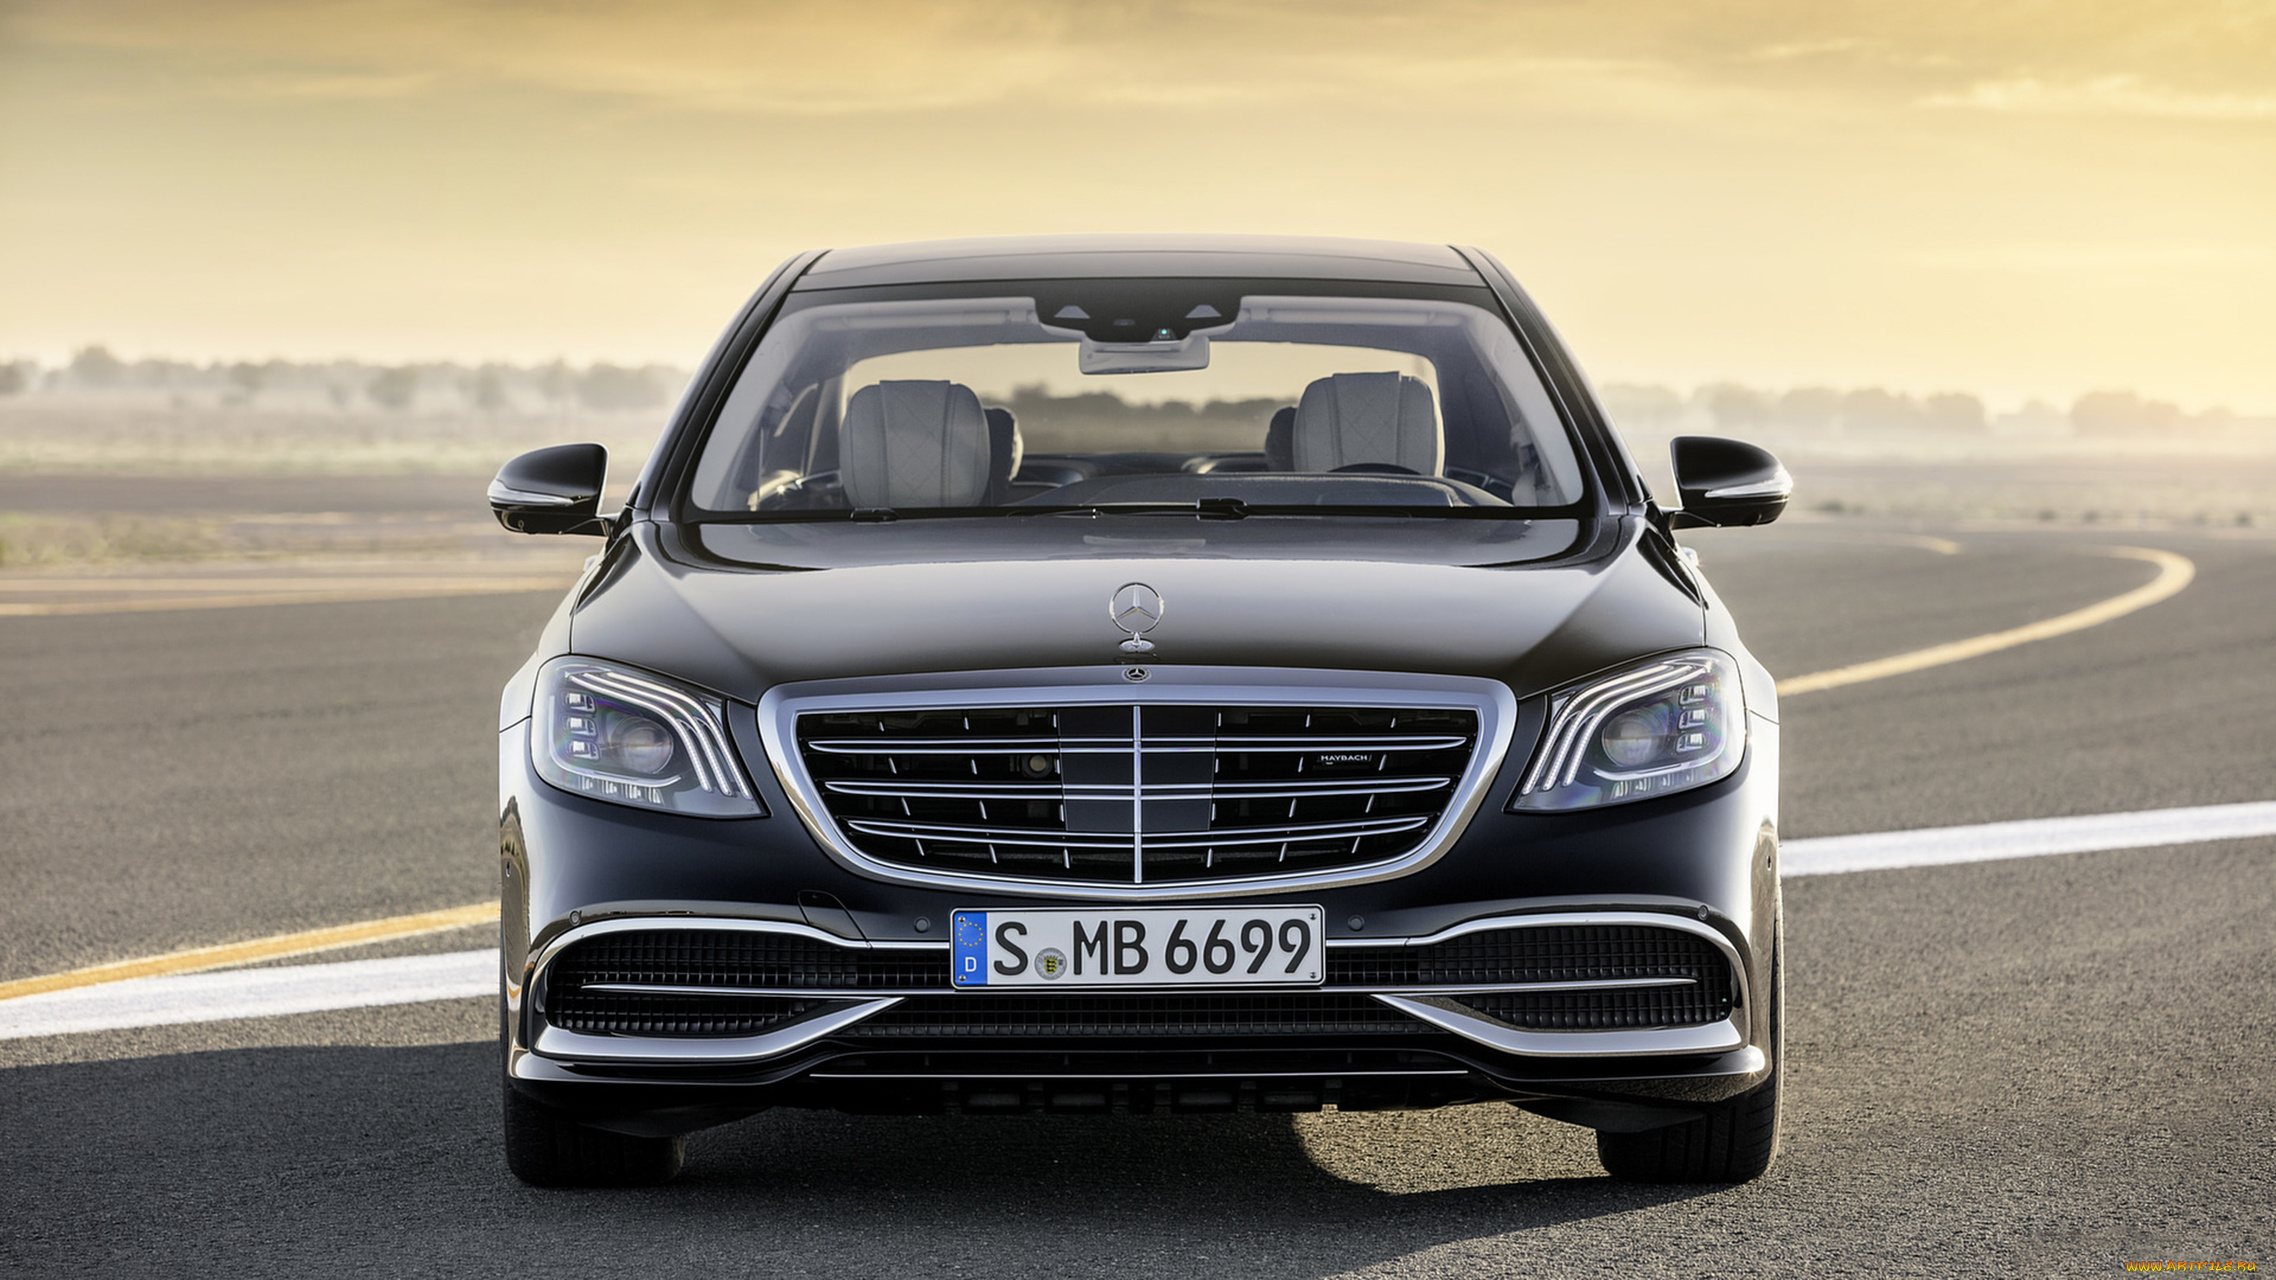 mercedes-maybach, s-class, s650, black, 2018, автомобили, mercedes-benz, s-class, 2018, s650, black, mercedes-maybach